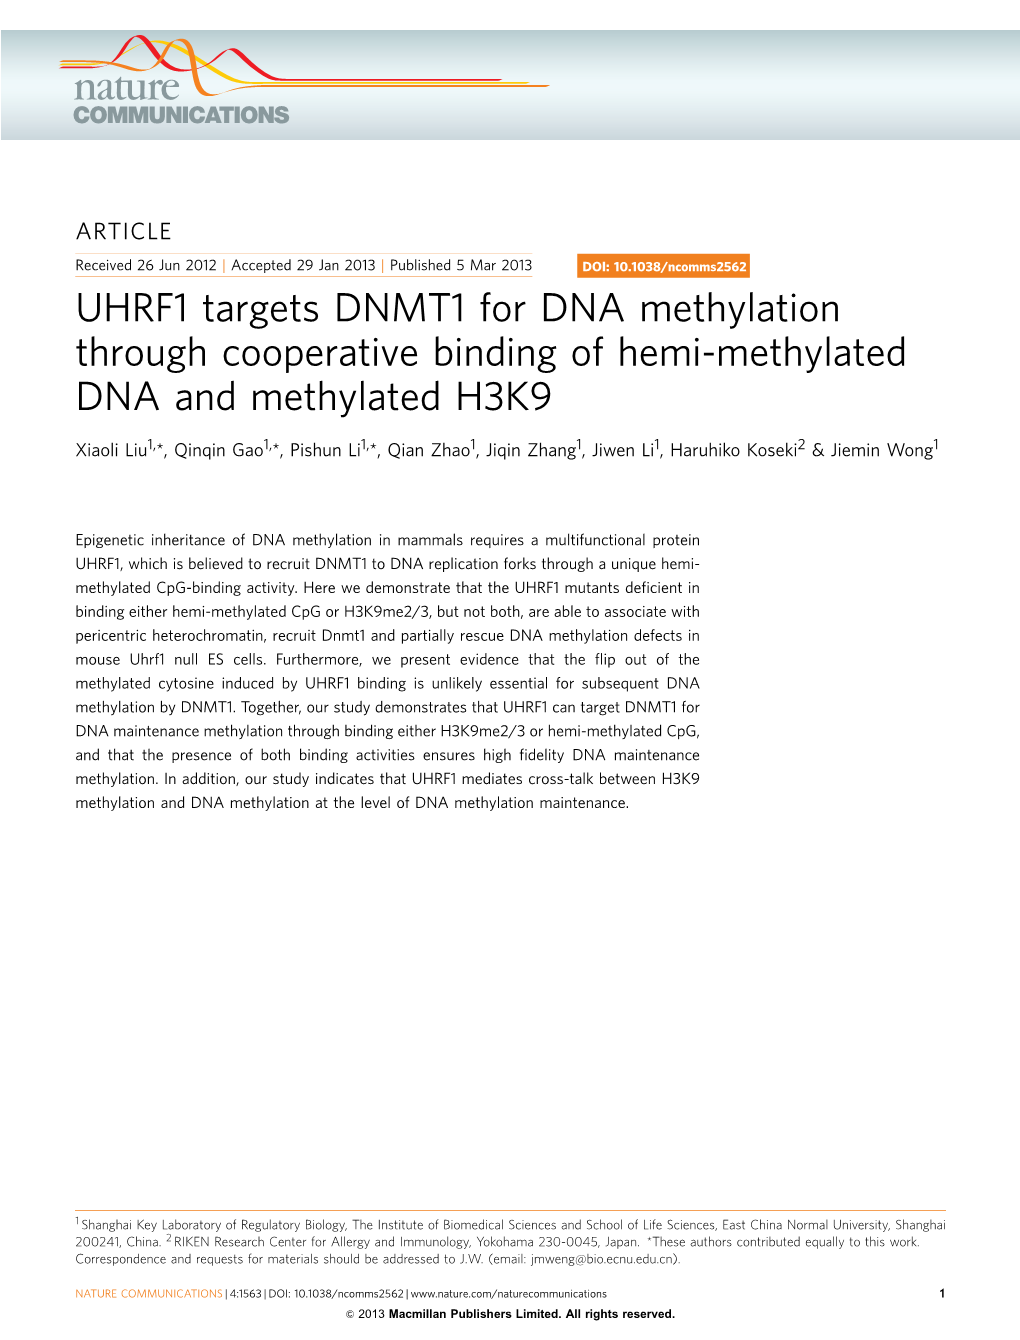 UHRF1 Targets DNMT1 for DNA Methylation Through Cooperative Binding of Hemi-Methylated DNA and Methylated H3K9